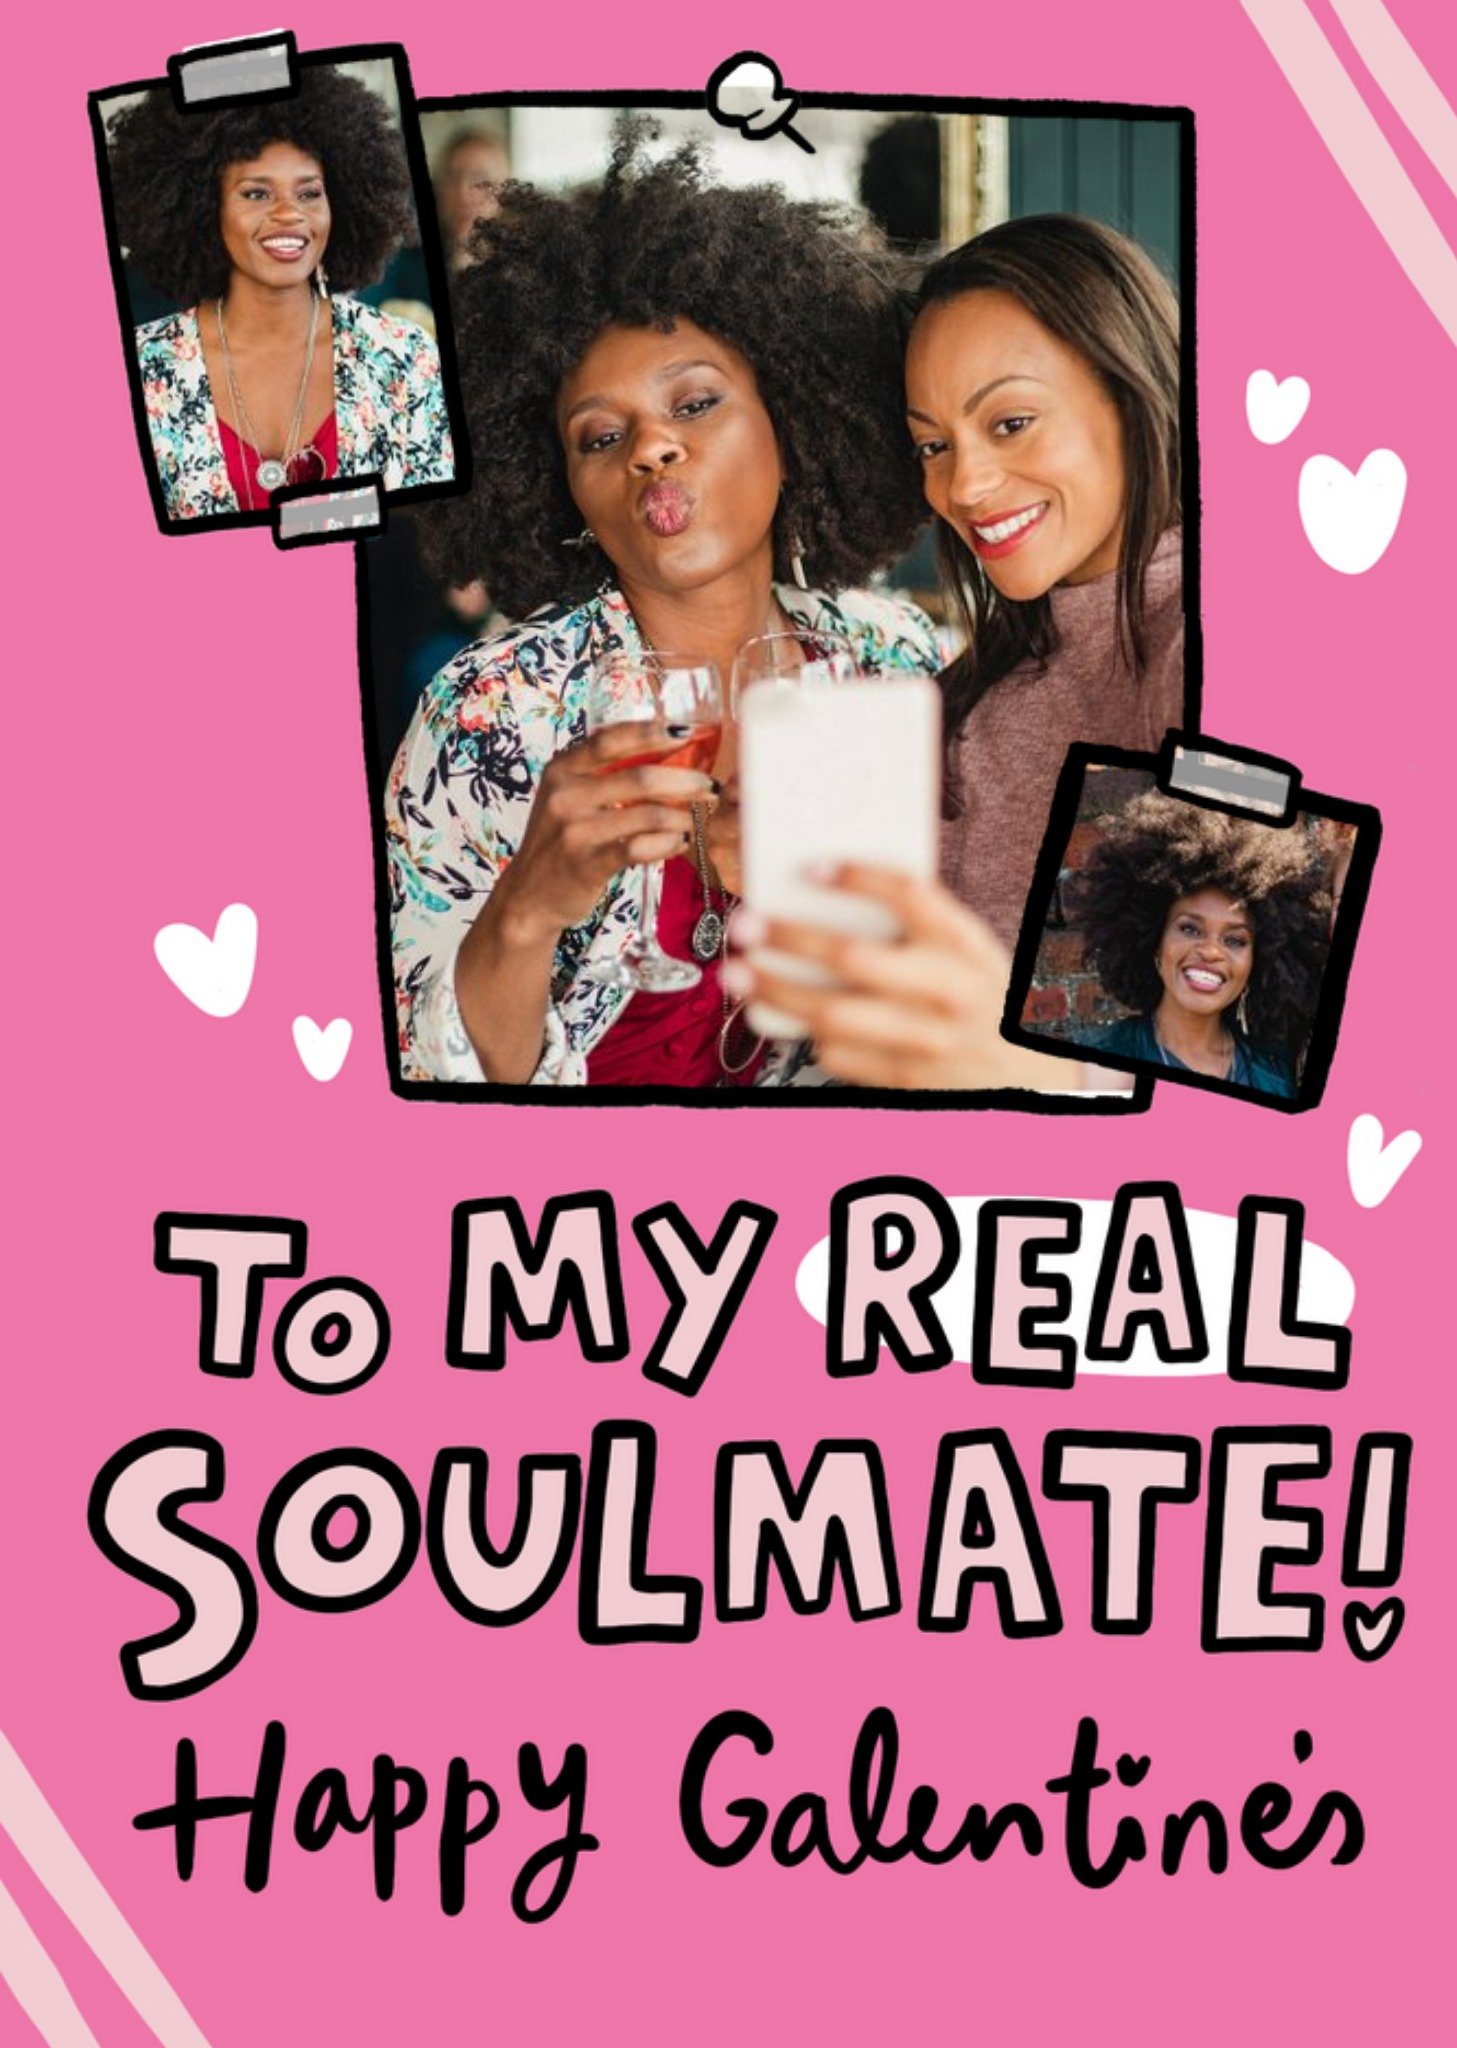 Moonpig Funny To My Real Soulmate Valentine's Photo Upload Card, Large